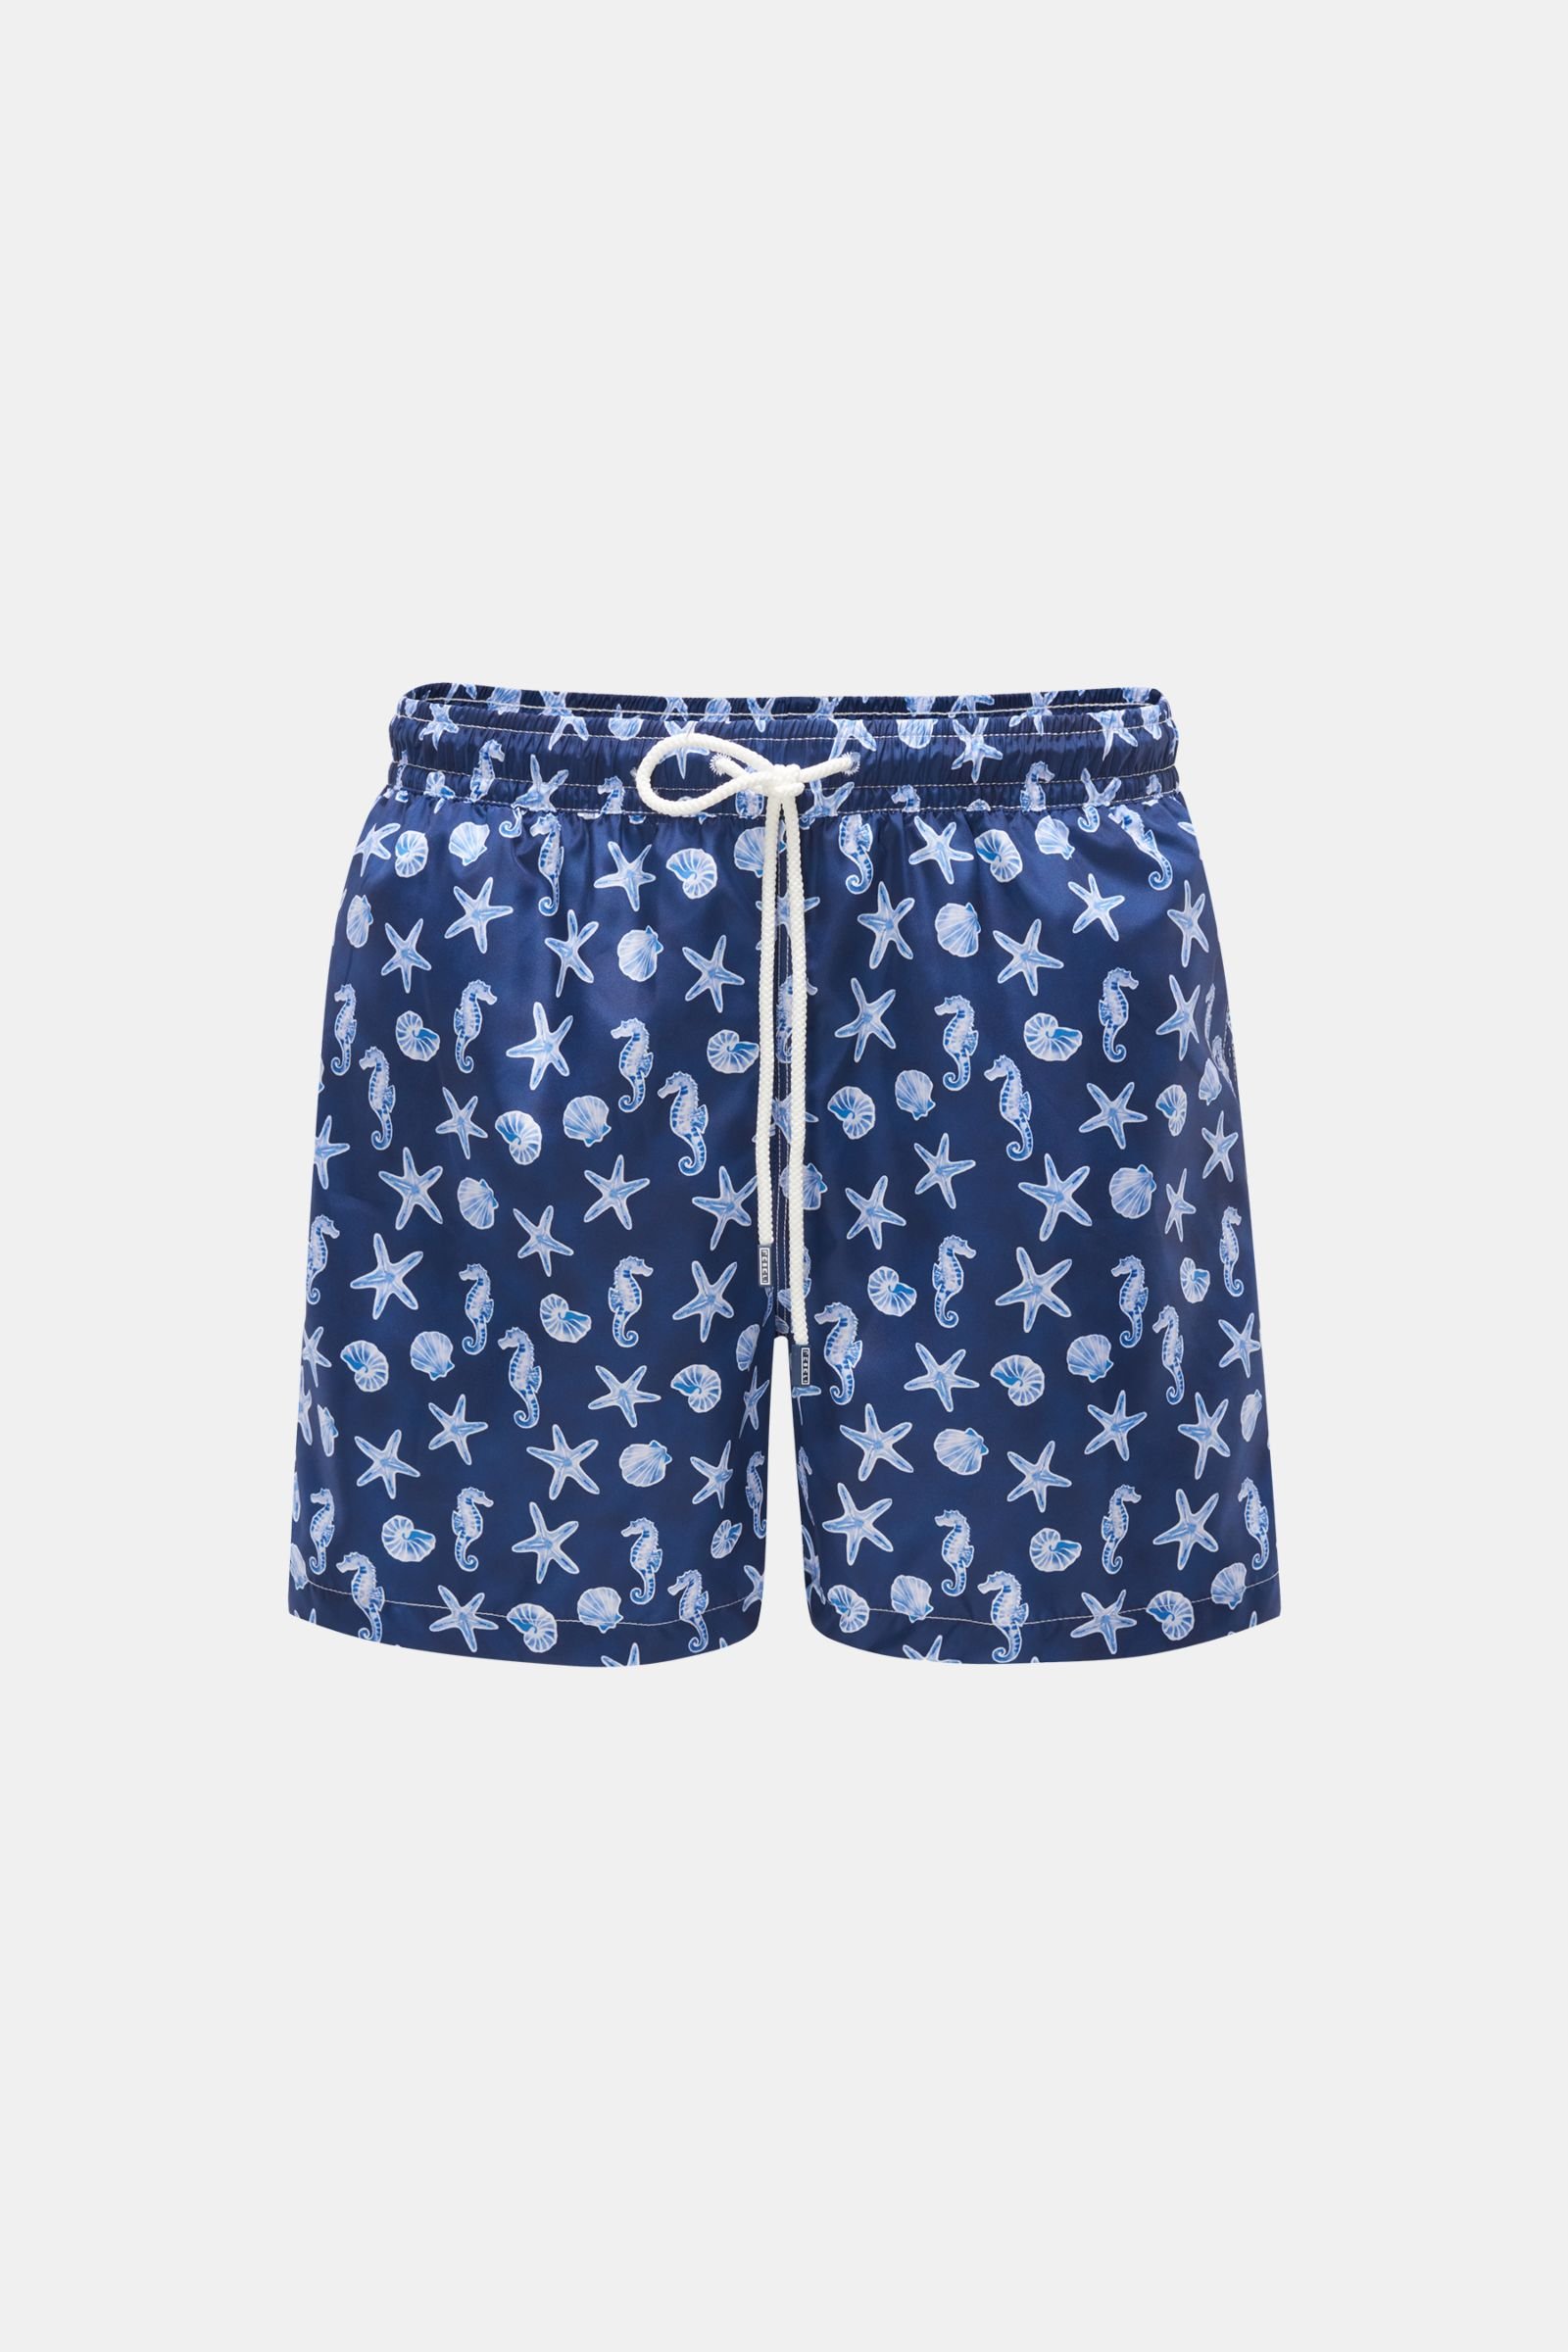 Swim shorts 'Madeira Airstop' navy patterned